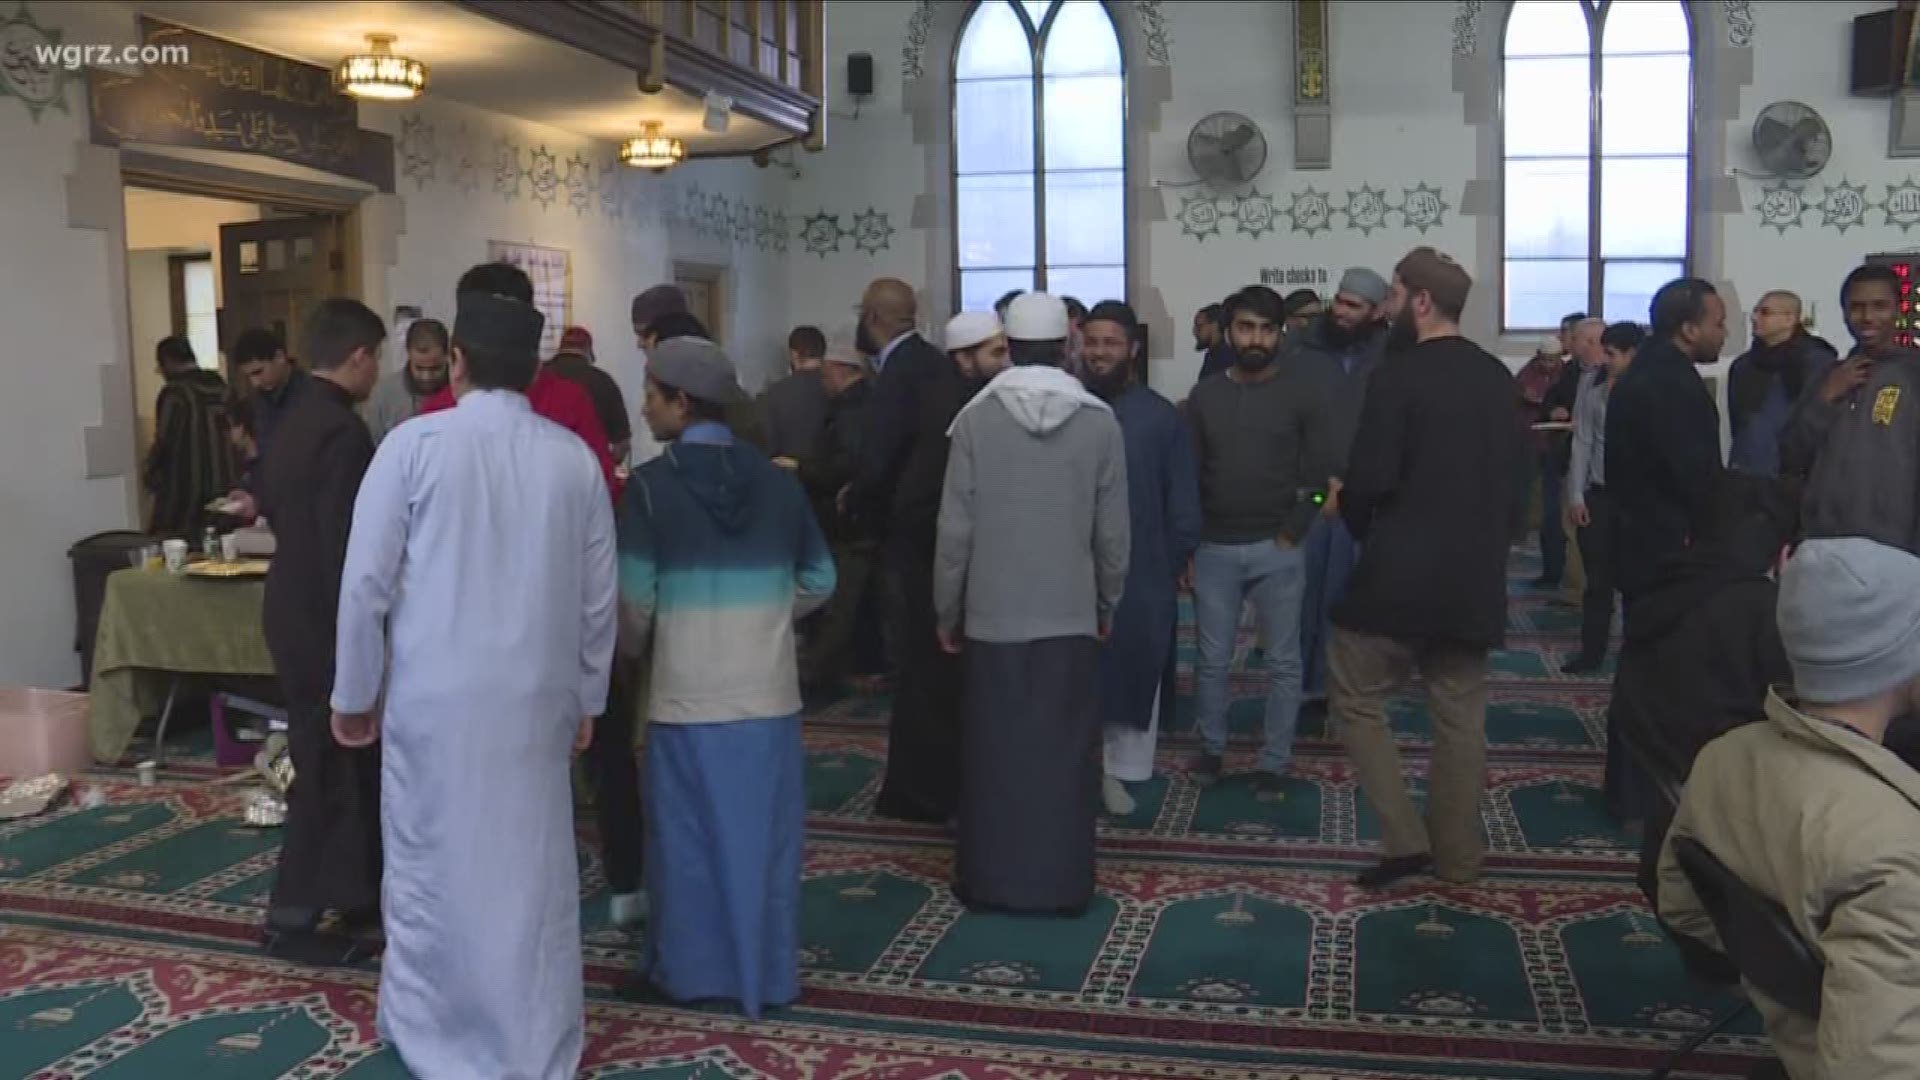 Open House Held At Mosque In Buffalo